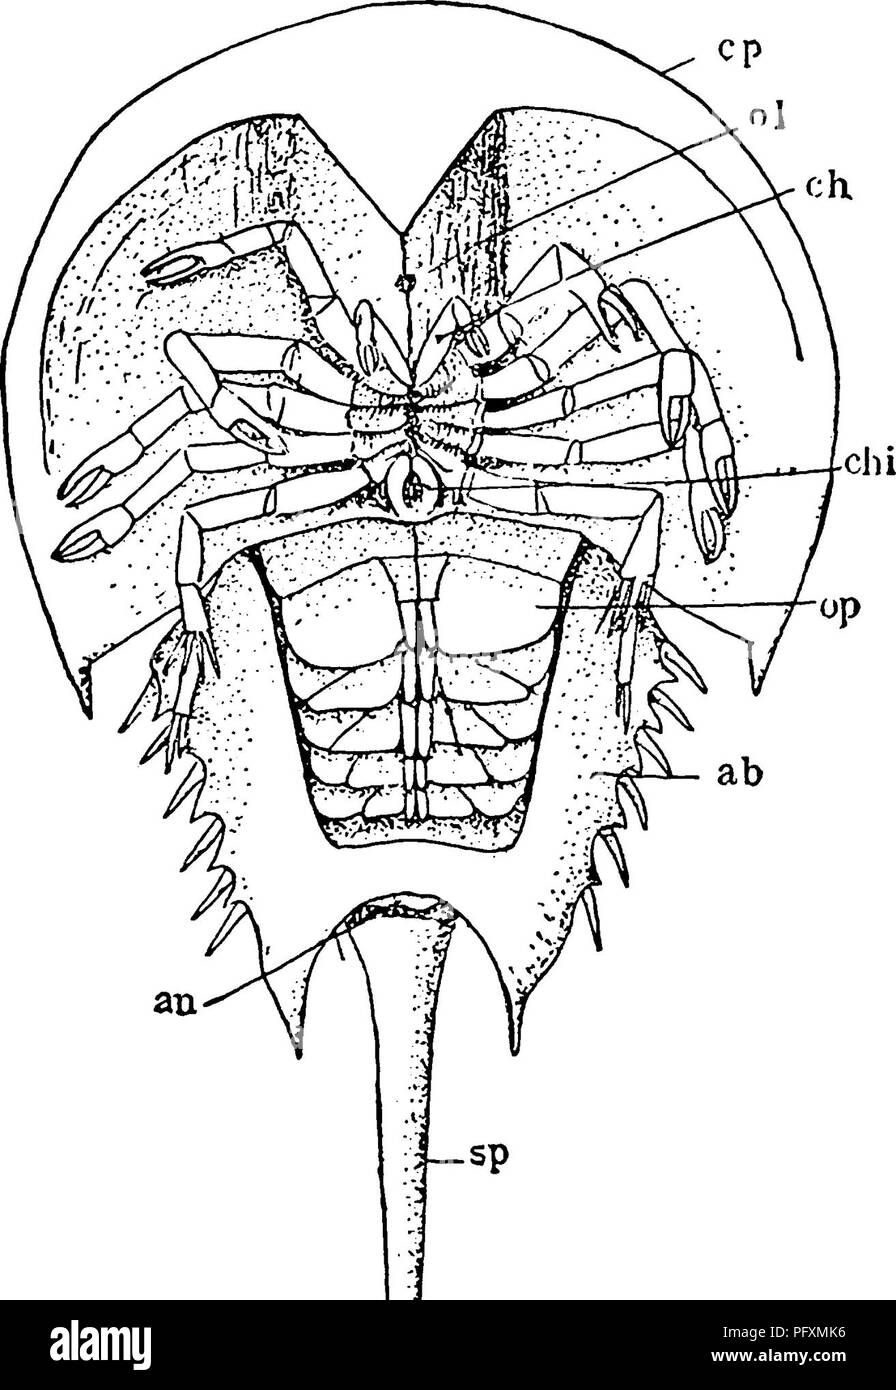 . The Eurypterida of New York. Eurypterida; Paleontology. THE EURYPTERIDA OF NEW YORK 43 the limbs of Limulus andtheeurypterids that are among the strongest proofs of their intimate relationship. The six pairs of limbs are currently divided into the preoral (the first) and postoral (the following five pairs). The preoral limbs are the chelicerae or mandibles, the postoral the walking, and burrowing or swimming legs. Be- sides these the mouth is surrounded by platelike appendages, functioning as lips. These are the epistoma, endostoma and metastoma. a The chelicerae in Limulus are small [see te Stock Photo